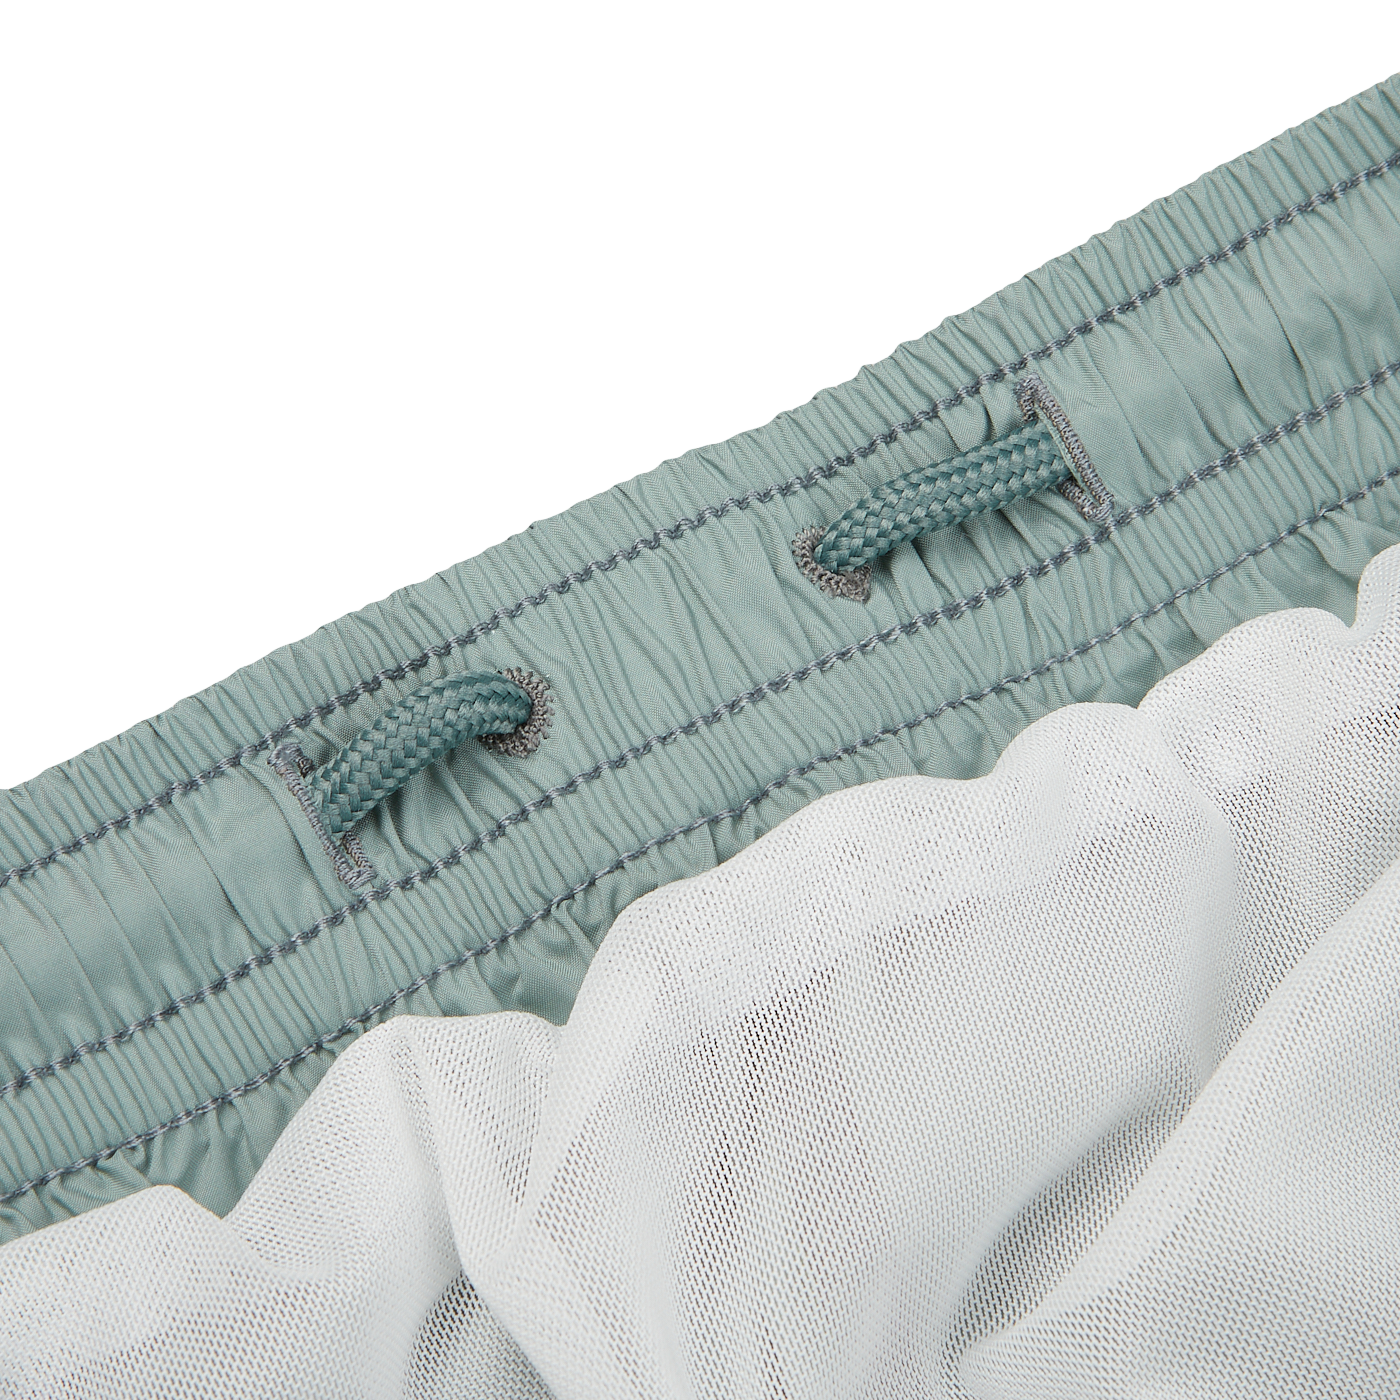 Close-up of a light blue Fedeli Sage Green Madeira swim shorts waistband with elastic gathers and two drawstrings, partially covered by a layer of white mesh fabric.